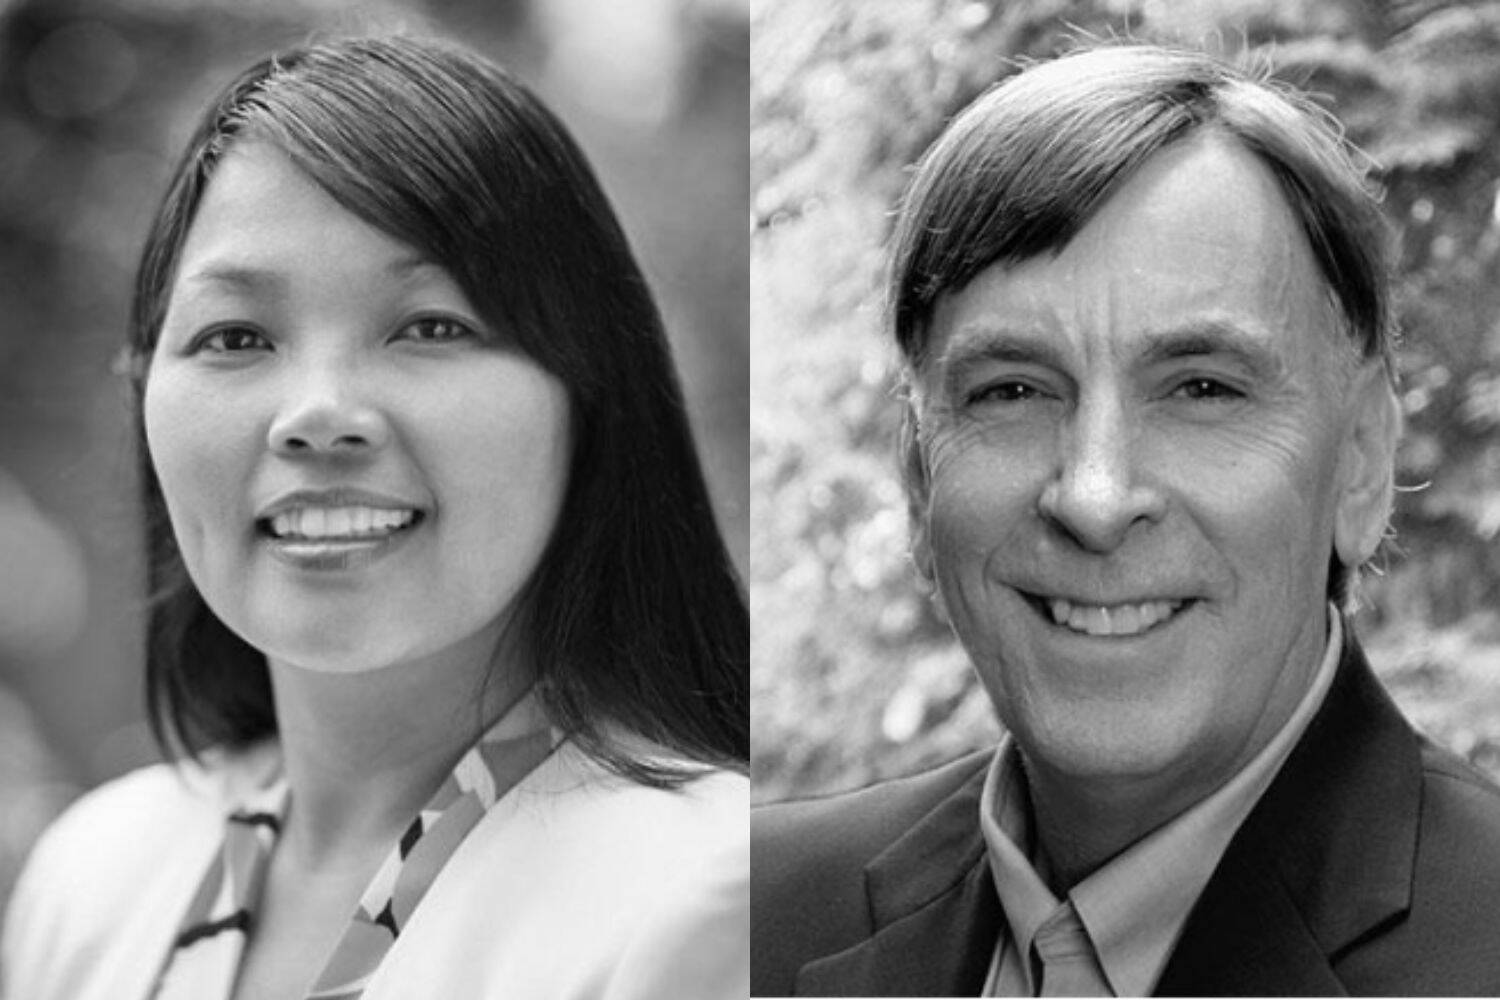 Kim-Khanh Van (left) and Randy Corman (right). (Screenshot from King County Election website)